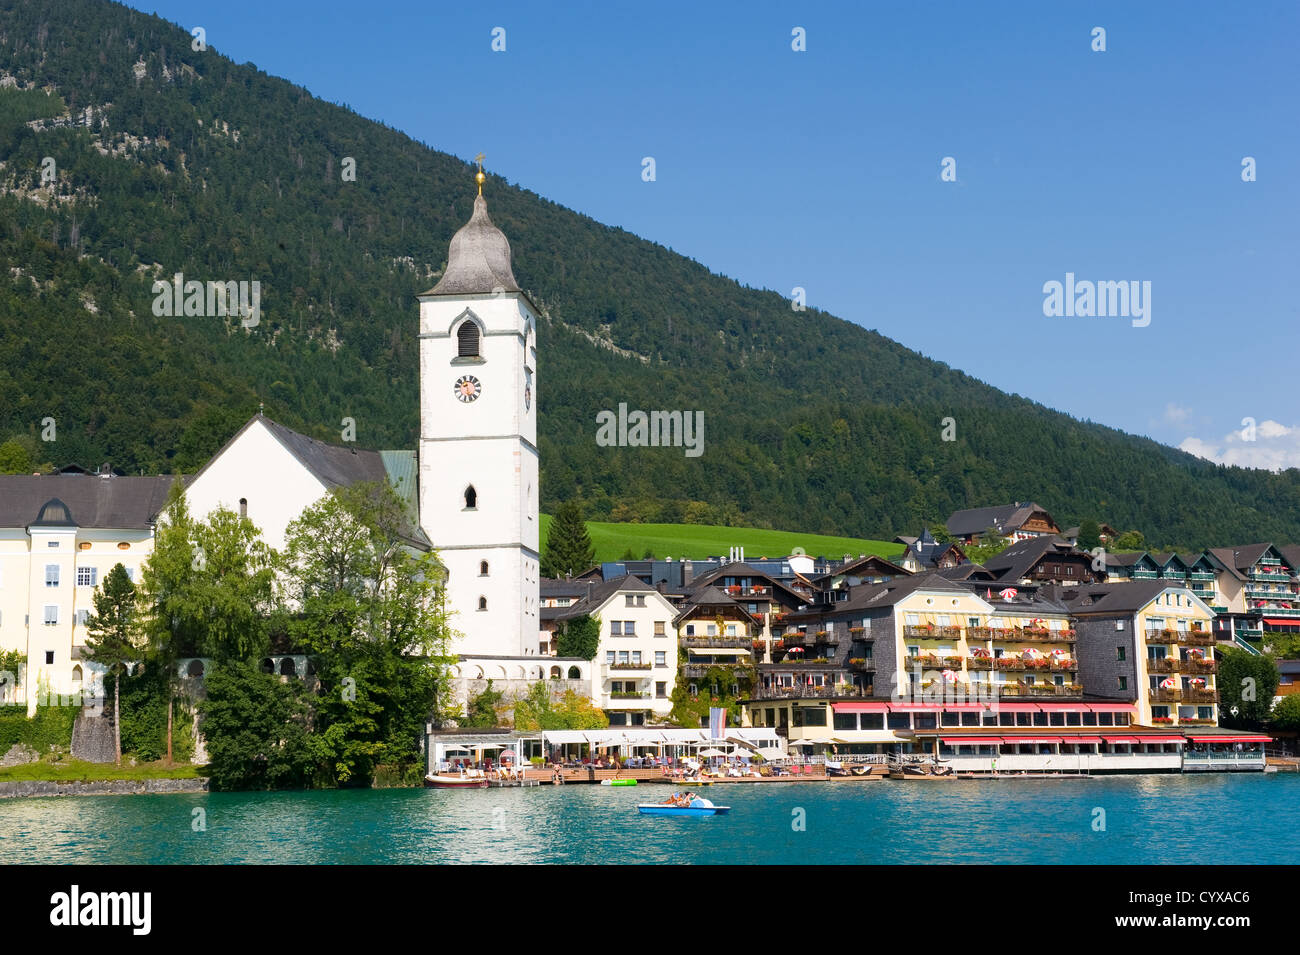 The small tourist town St. Wolfgang on the banks of the Wolfgangsee in Austria Stock Photo